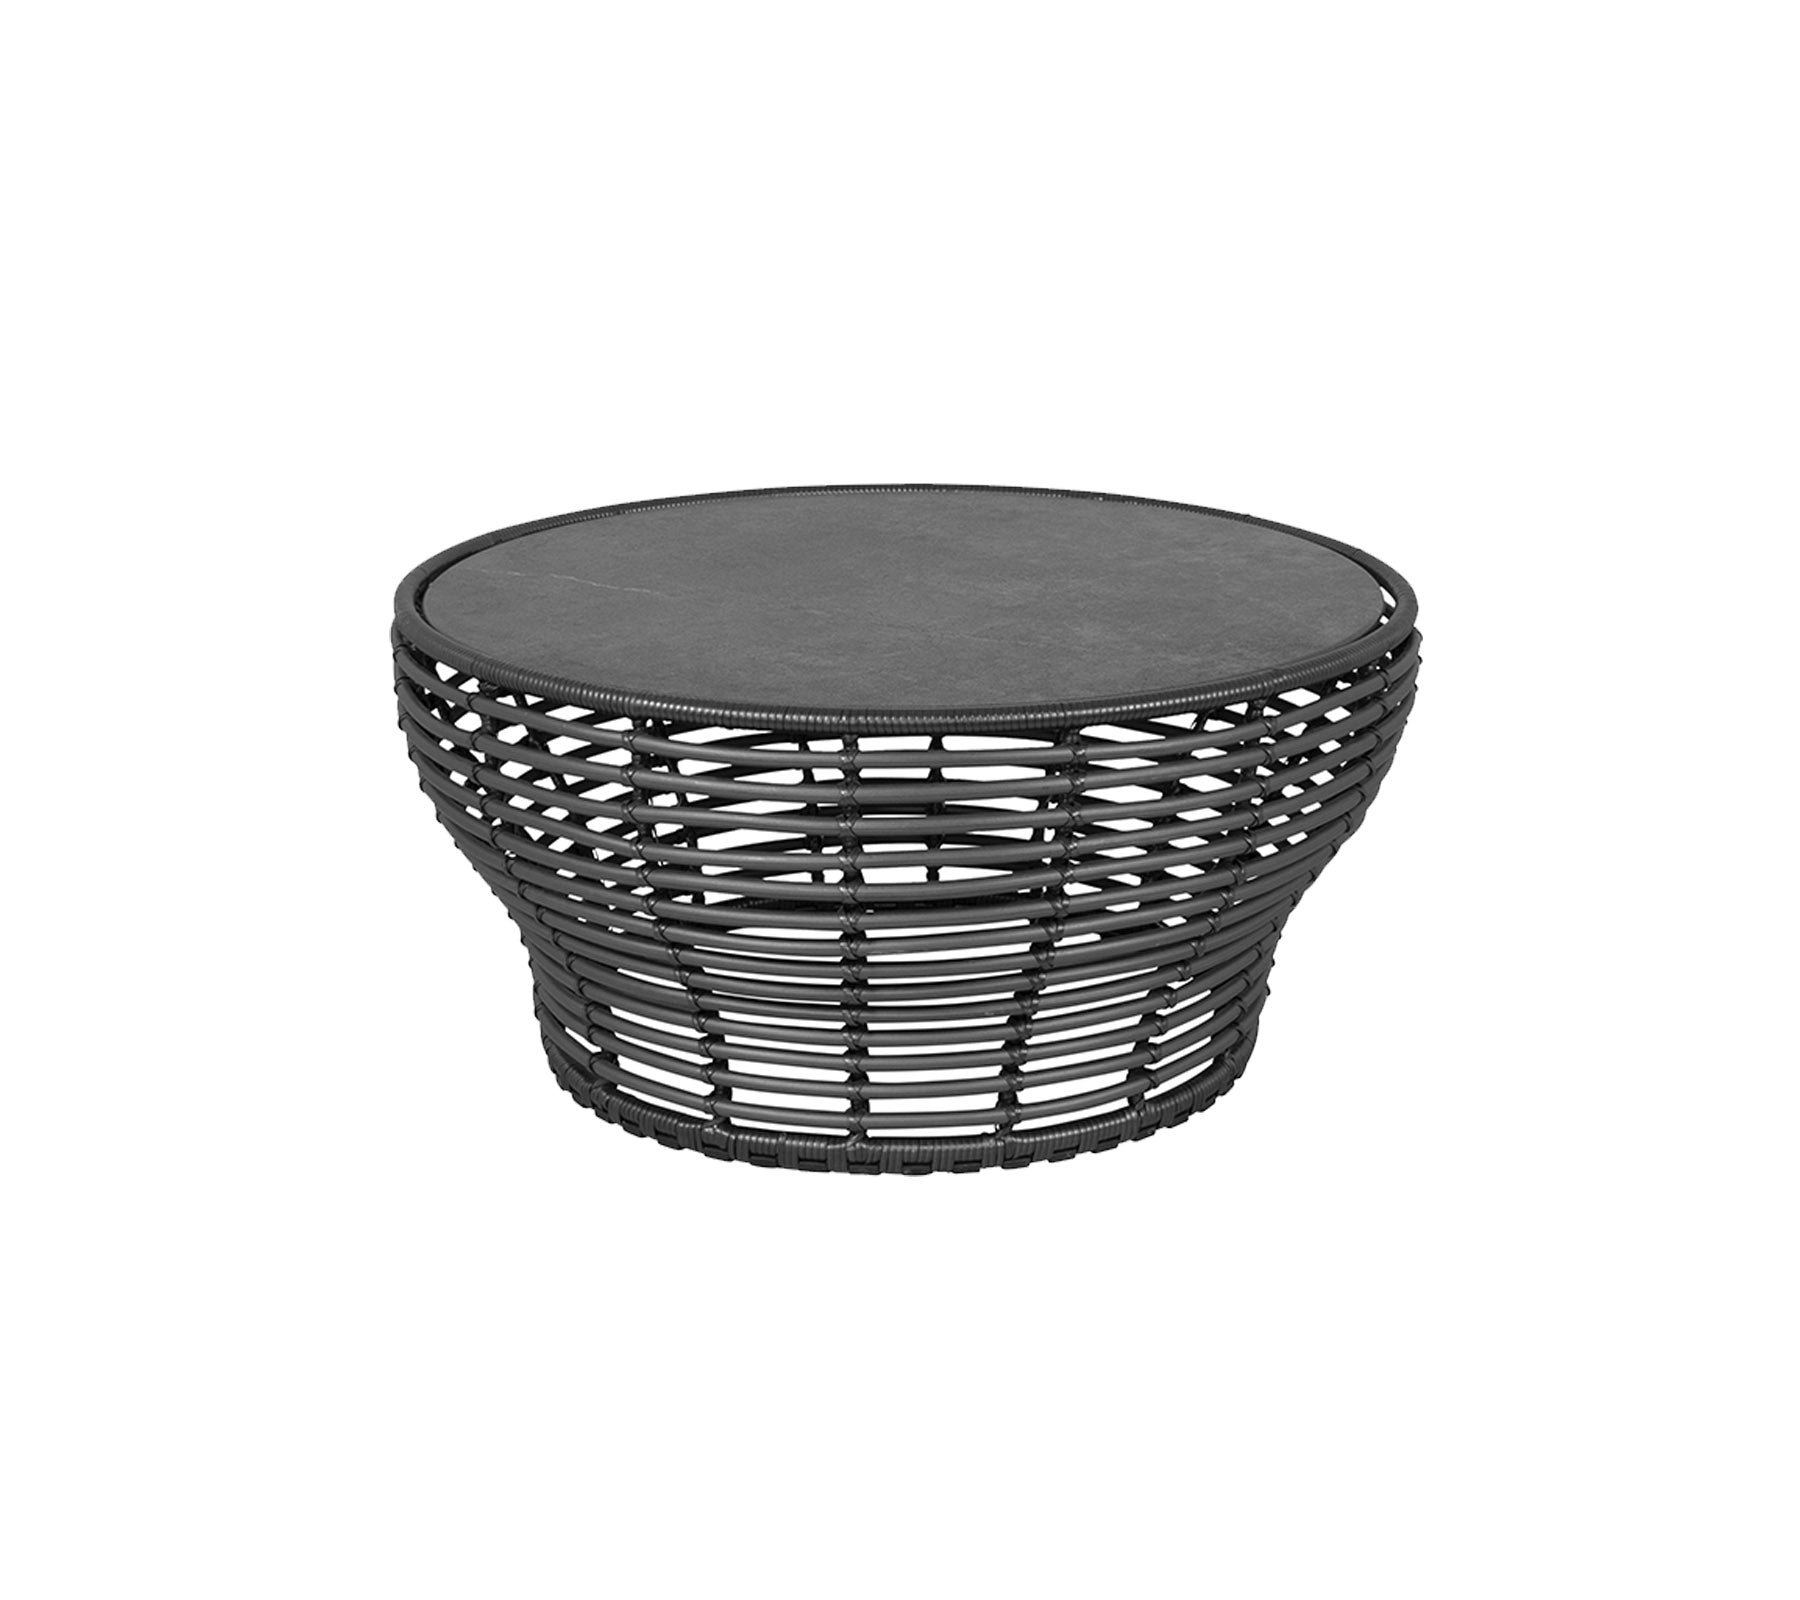 Cane-line Basket Coffee Table, Large 53202G